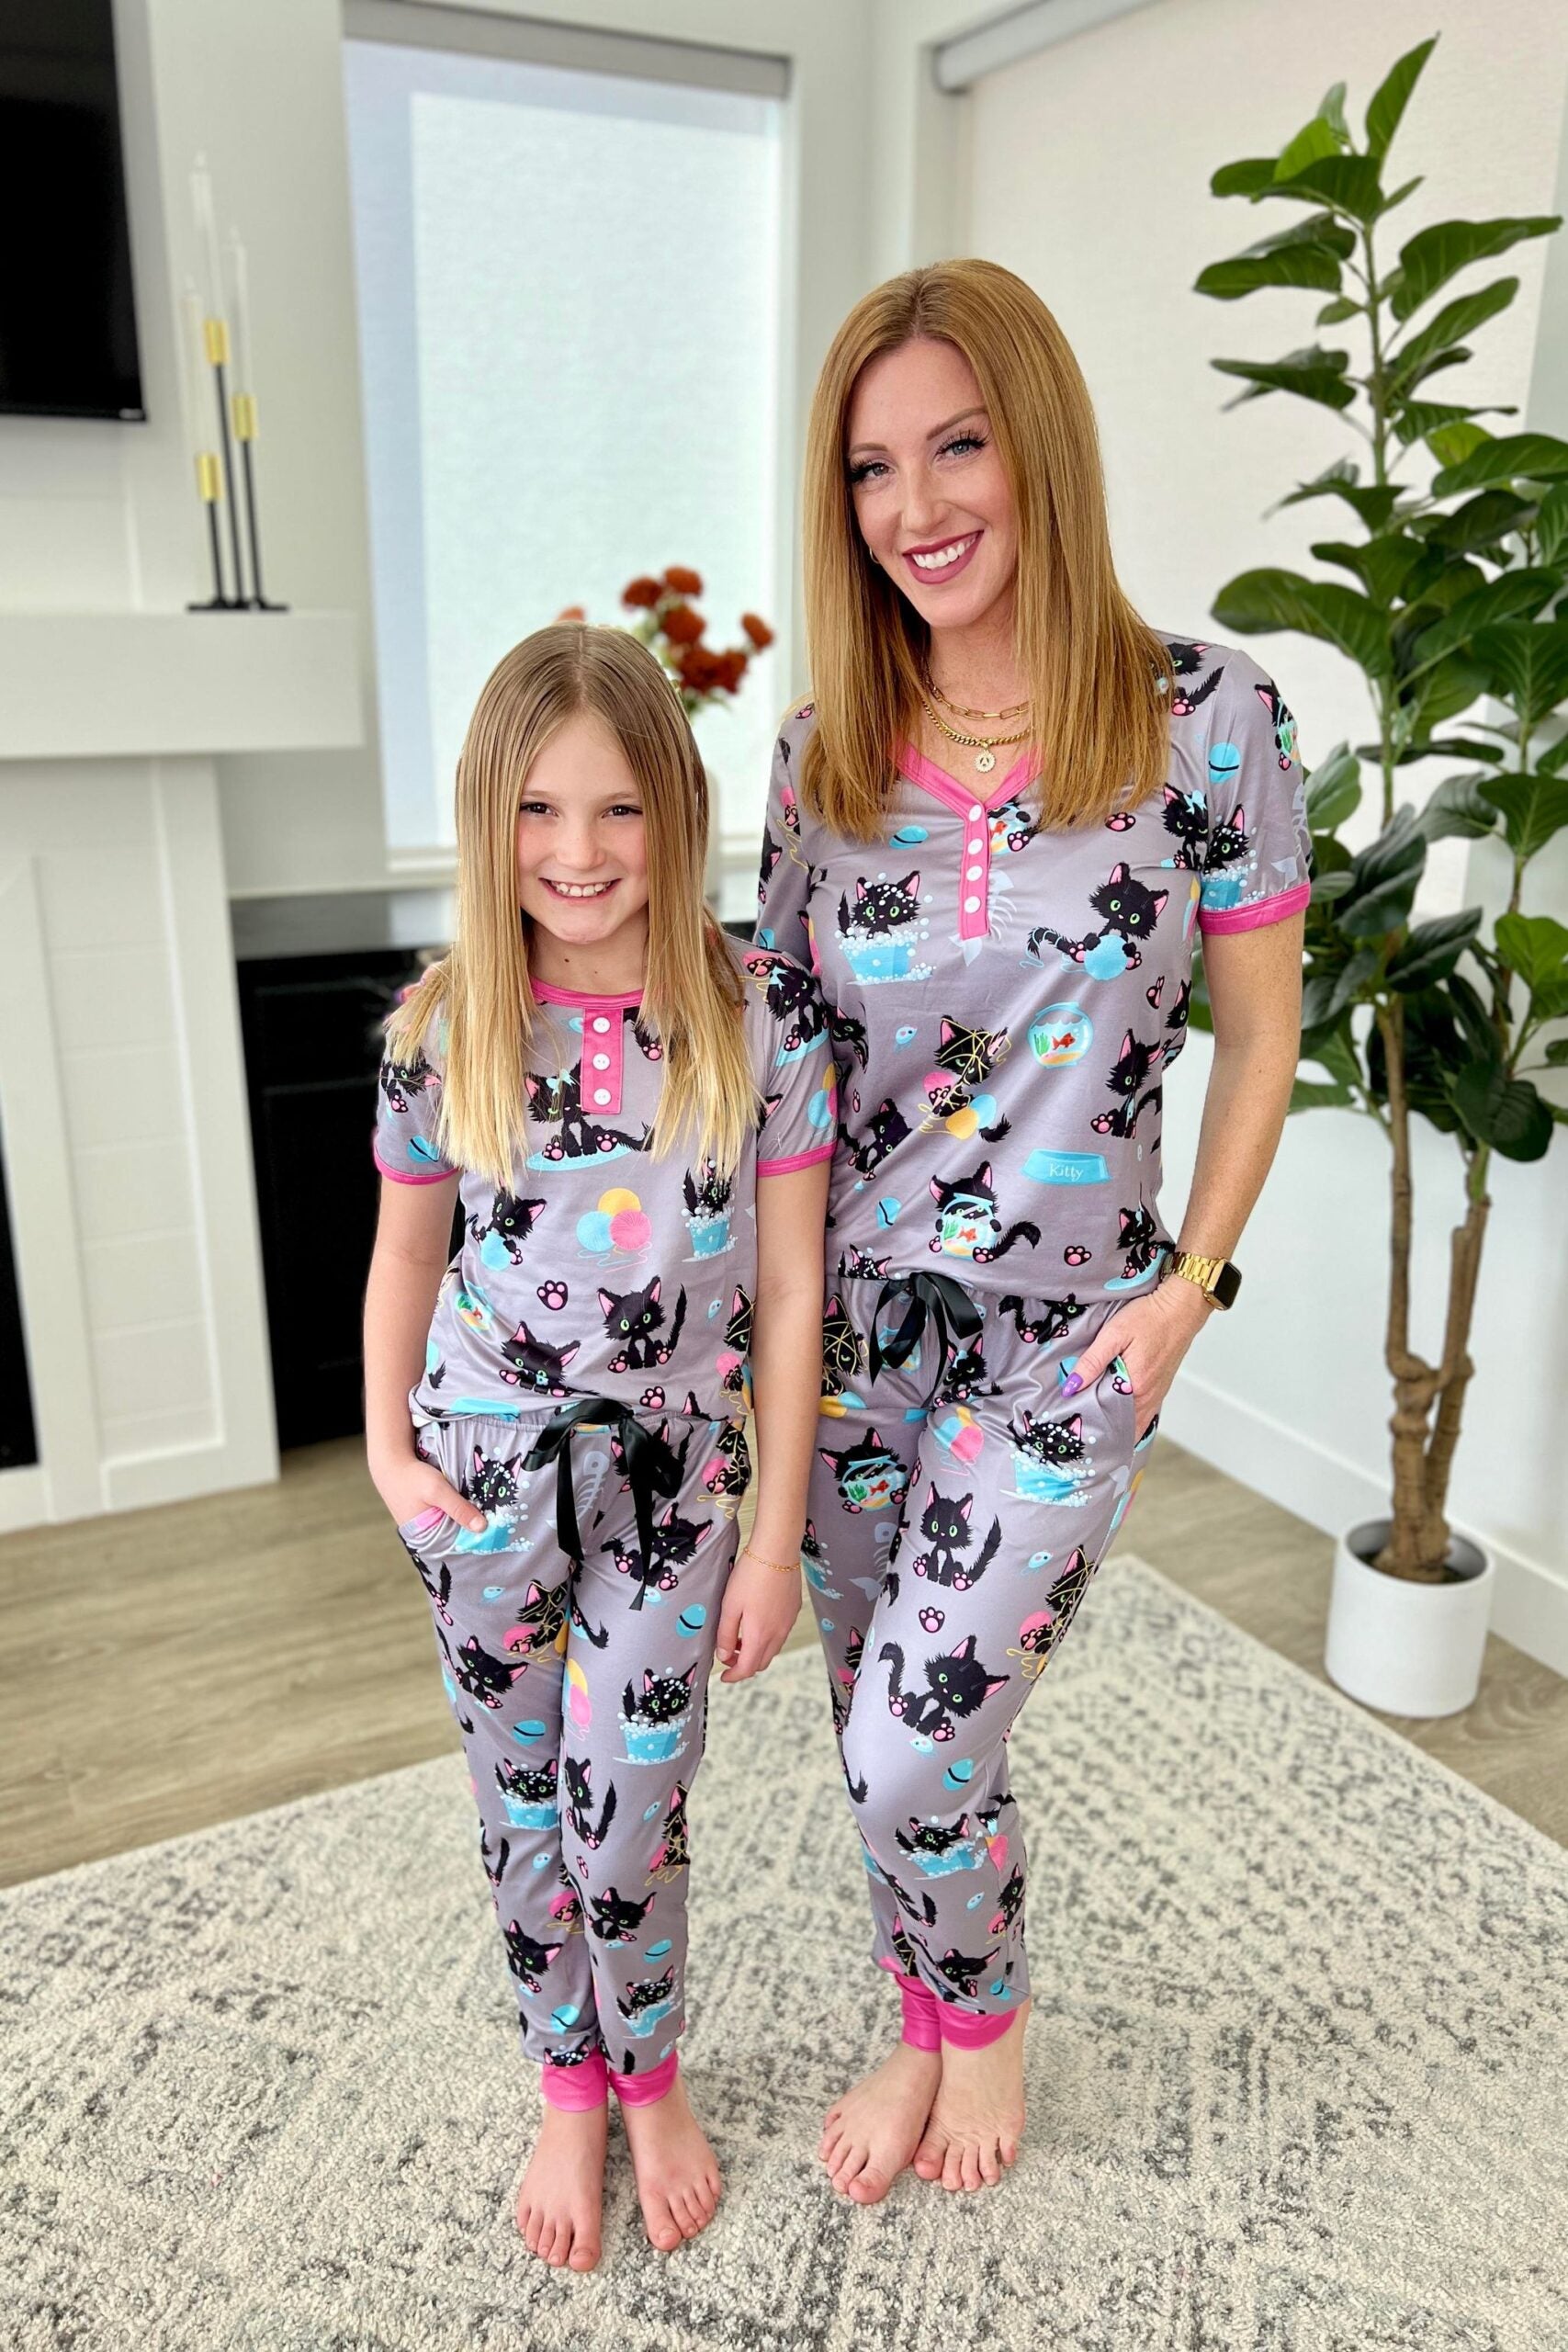 ***PRE-ORDER*** Shirley Mom & Me Jogger PJ Set - Black Cat (Women's and Kids') - Shipping Early April